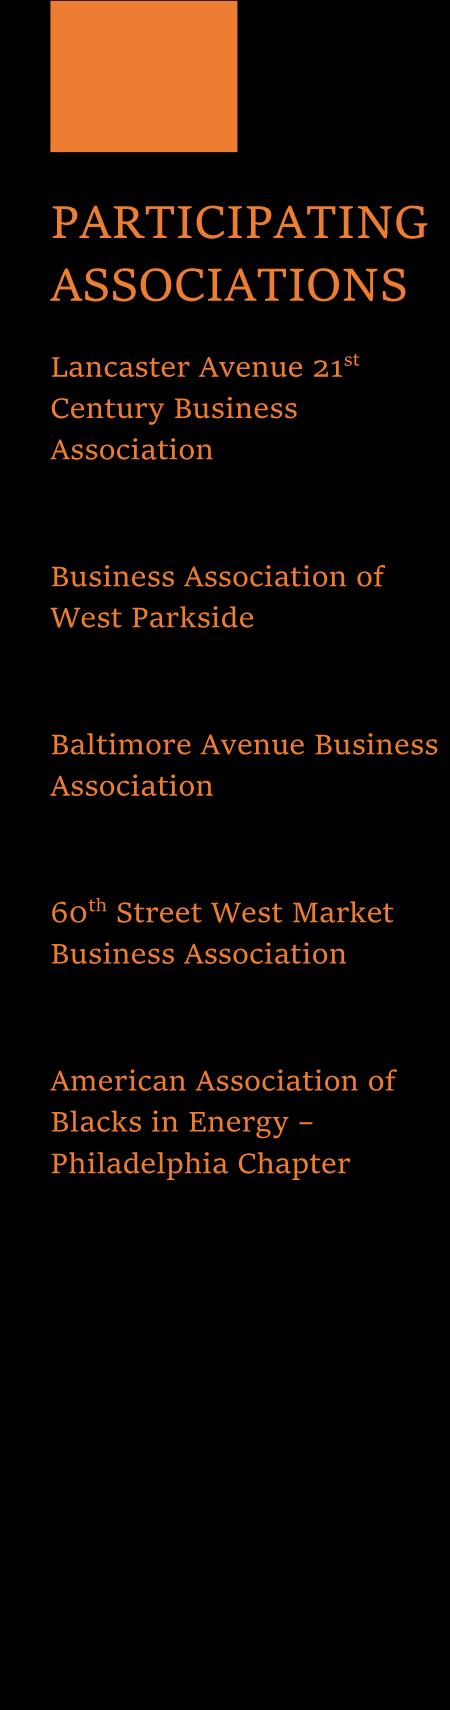 Letter from the President Dear Stakeholders of the West Philadelphia Community, Since August of 2015, under the banner of the West Philadelphia Corridor Collaborative, I have engaged with businesses